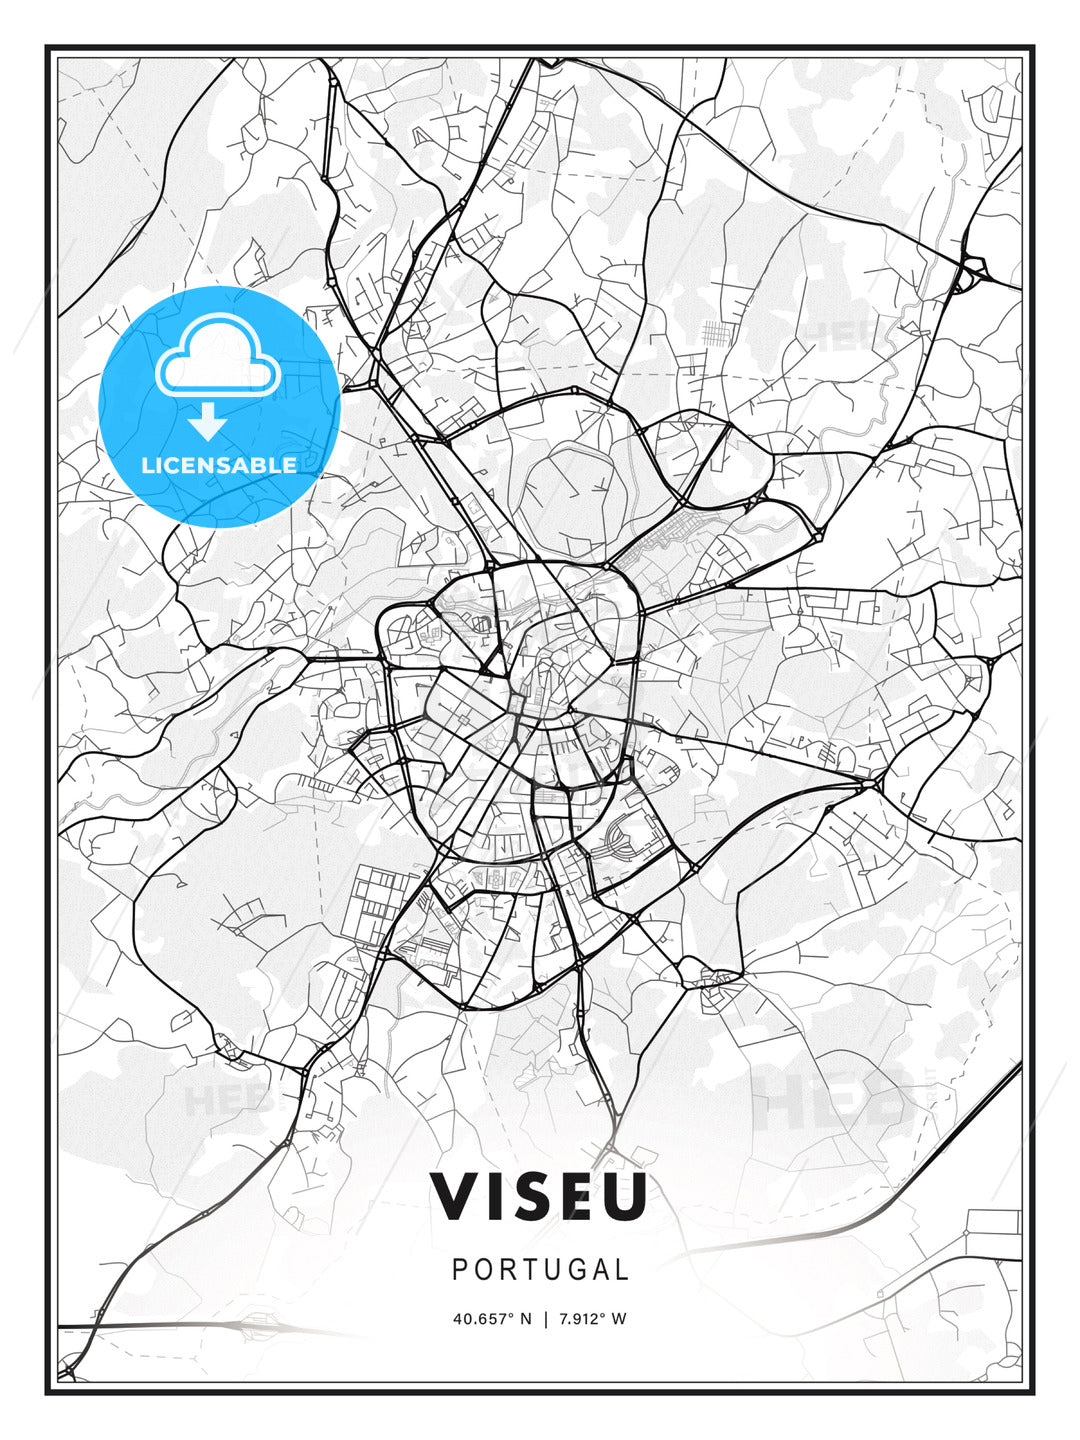 Viseu, Portugal, Modern Print Template in Various Formats - HEBSTREITS Sketches